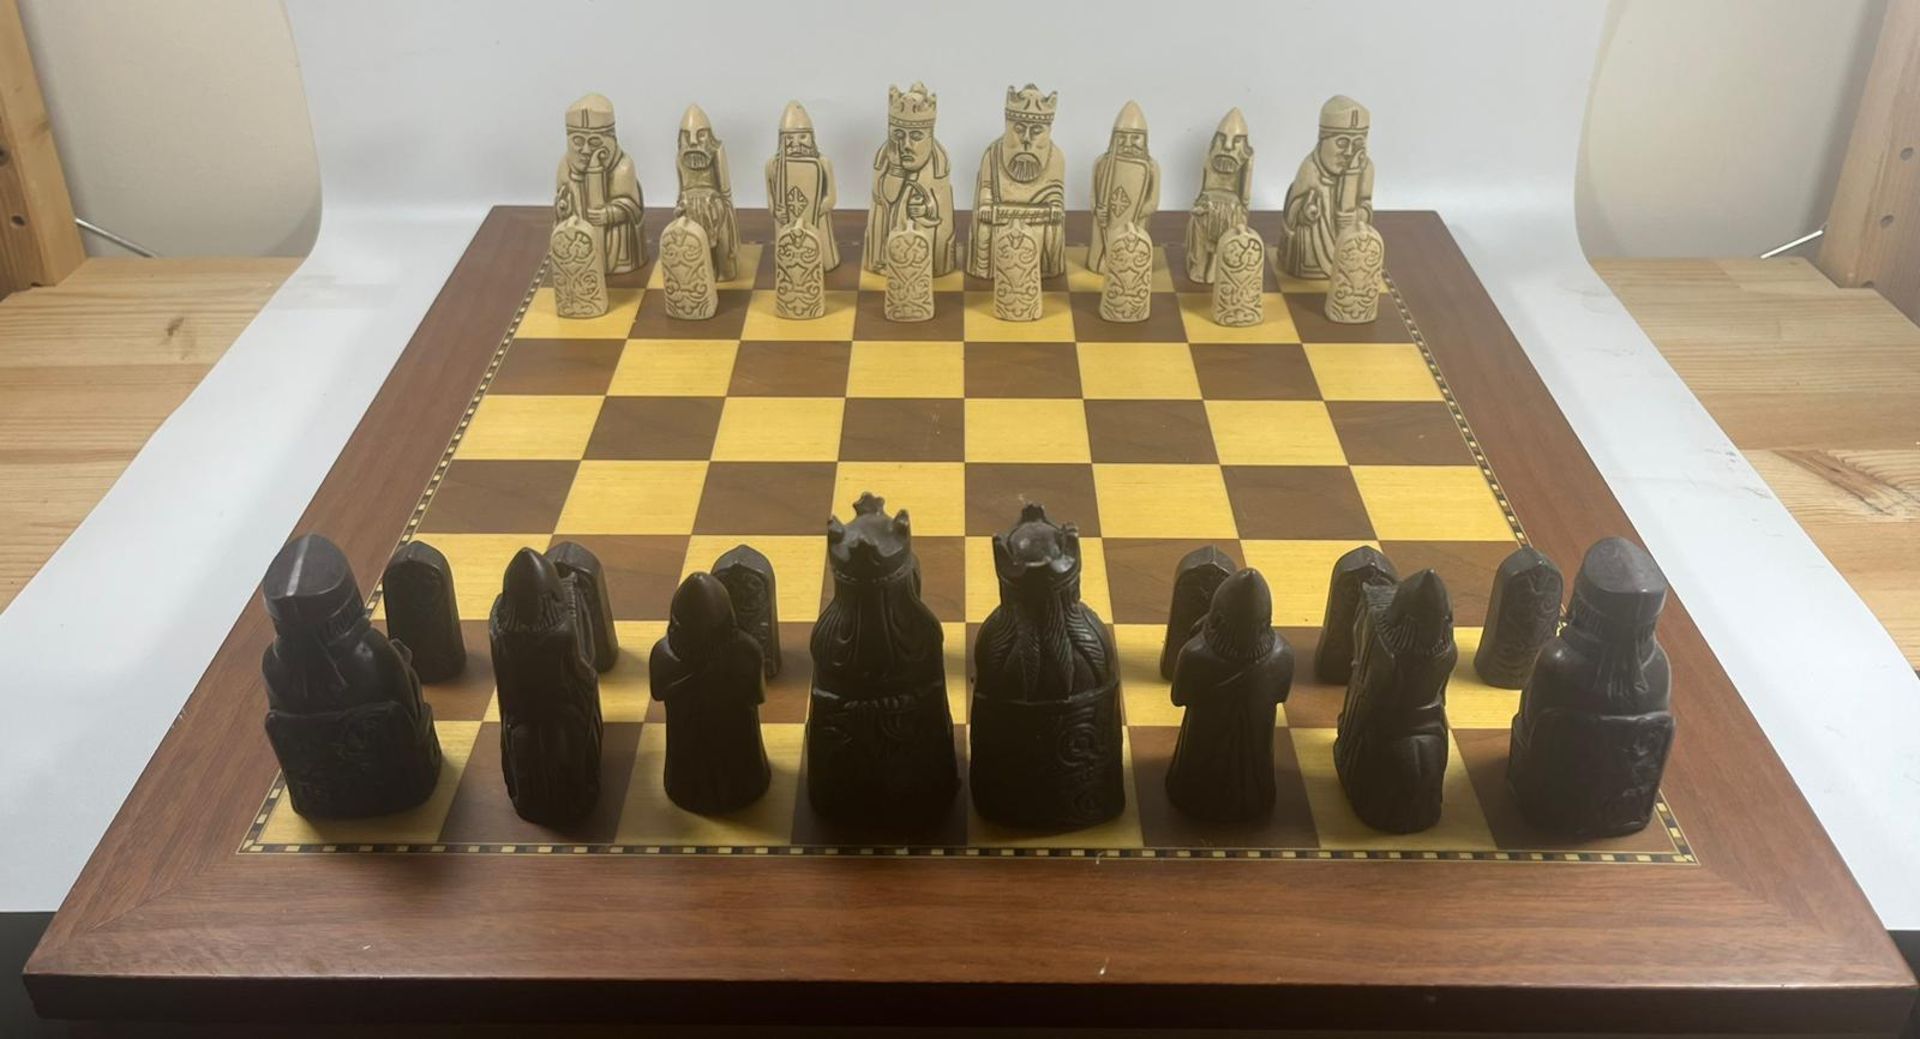 A VINTAGE LEWIS CHESSMEN CHESS SET MODELLED AS MEDIEVAL FIGURES ON AN INLAID WOODEN BOARD, KING - Image 5 of 5